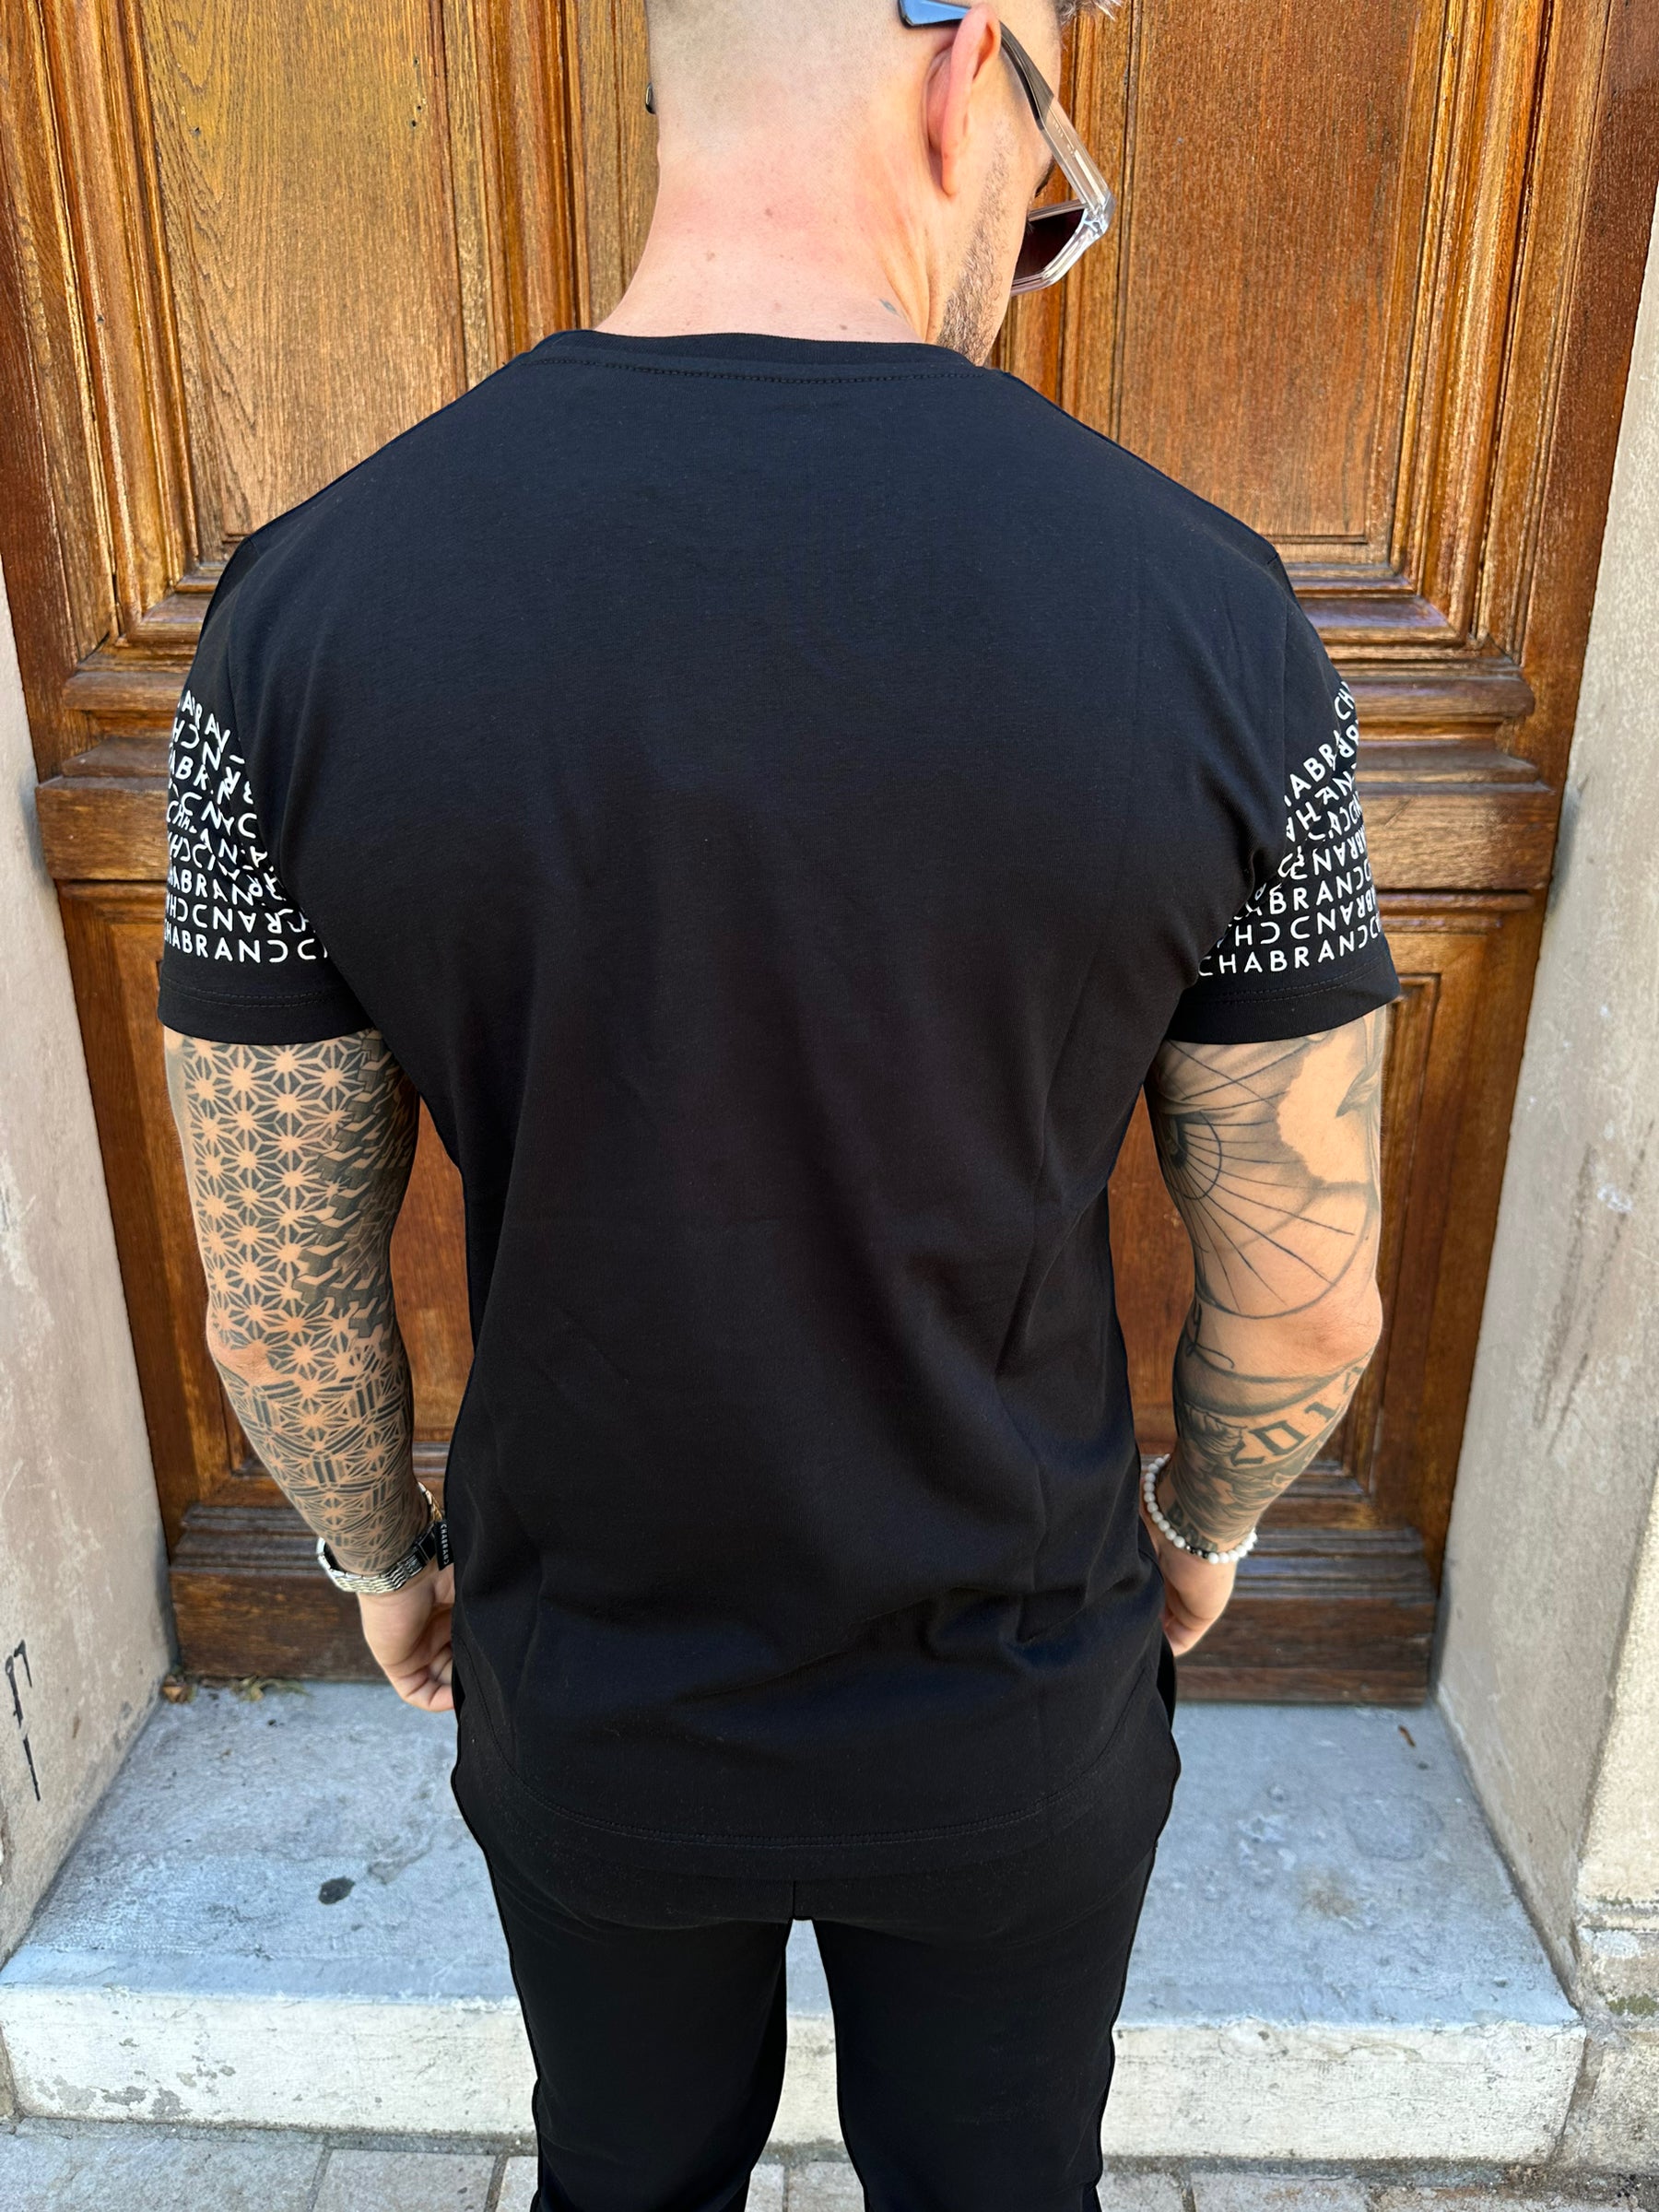 CHABRAND - Black t-shirt with mosaic sign